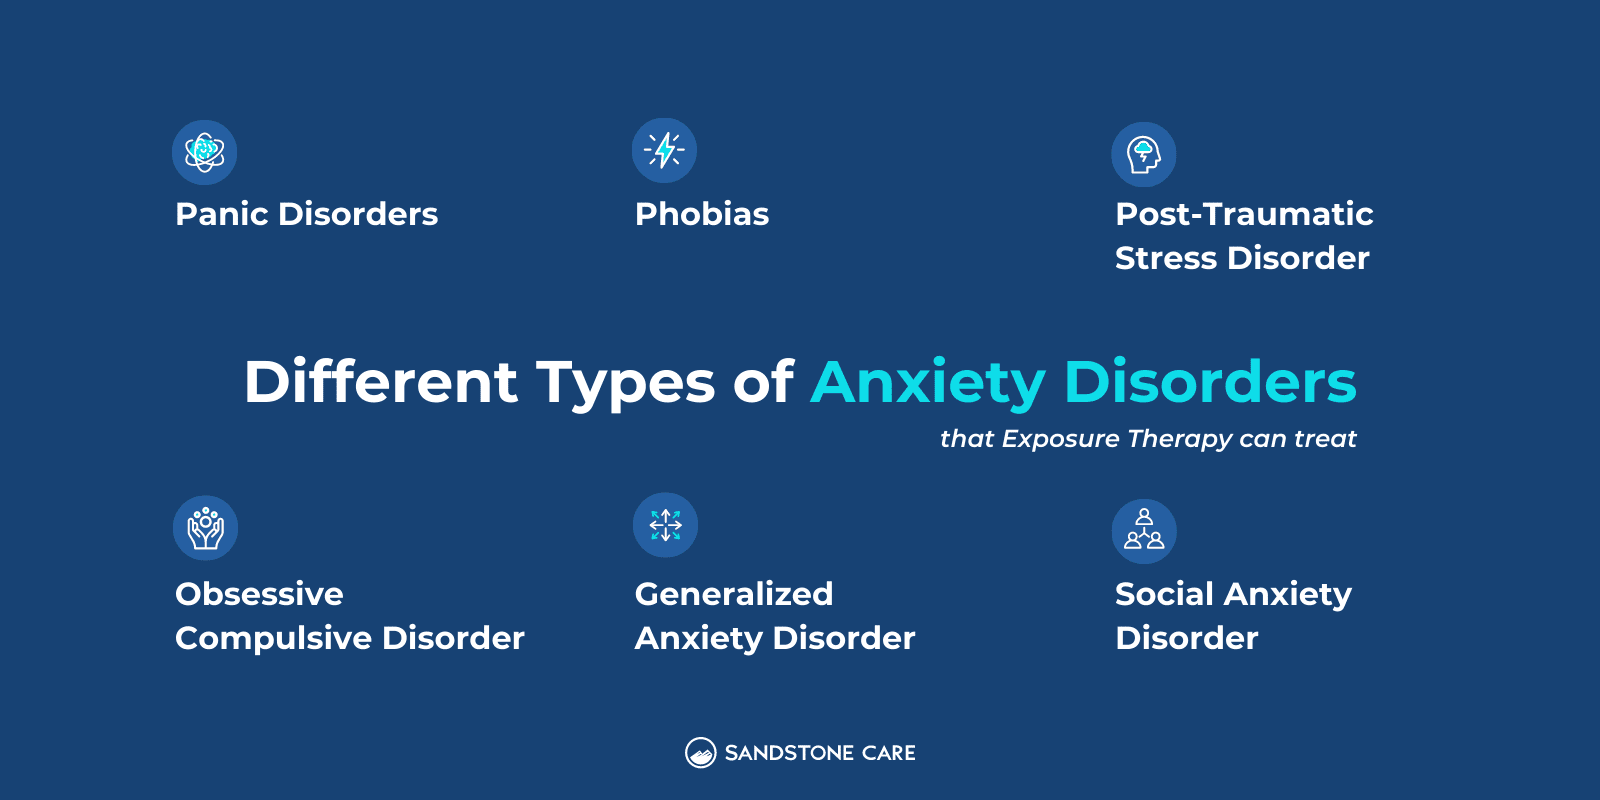 "Different types of anxiety disorders that exposure therapy can treat" is written in the center while types of anxiety disorders surround the text, each demonstrated with relevant icons